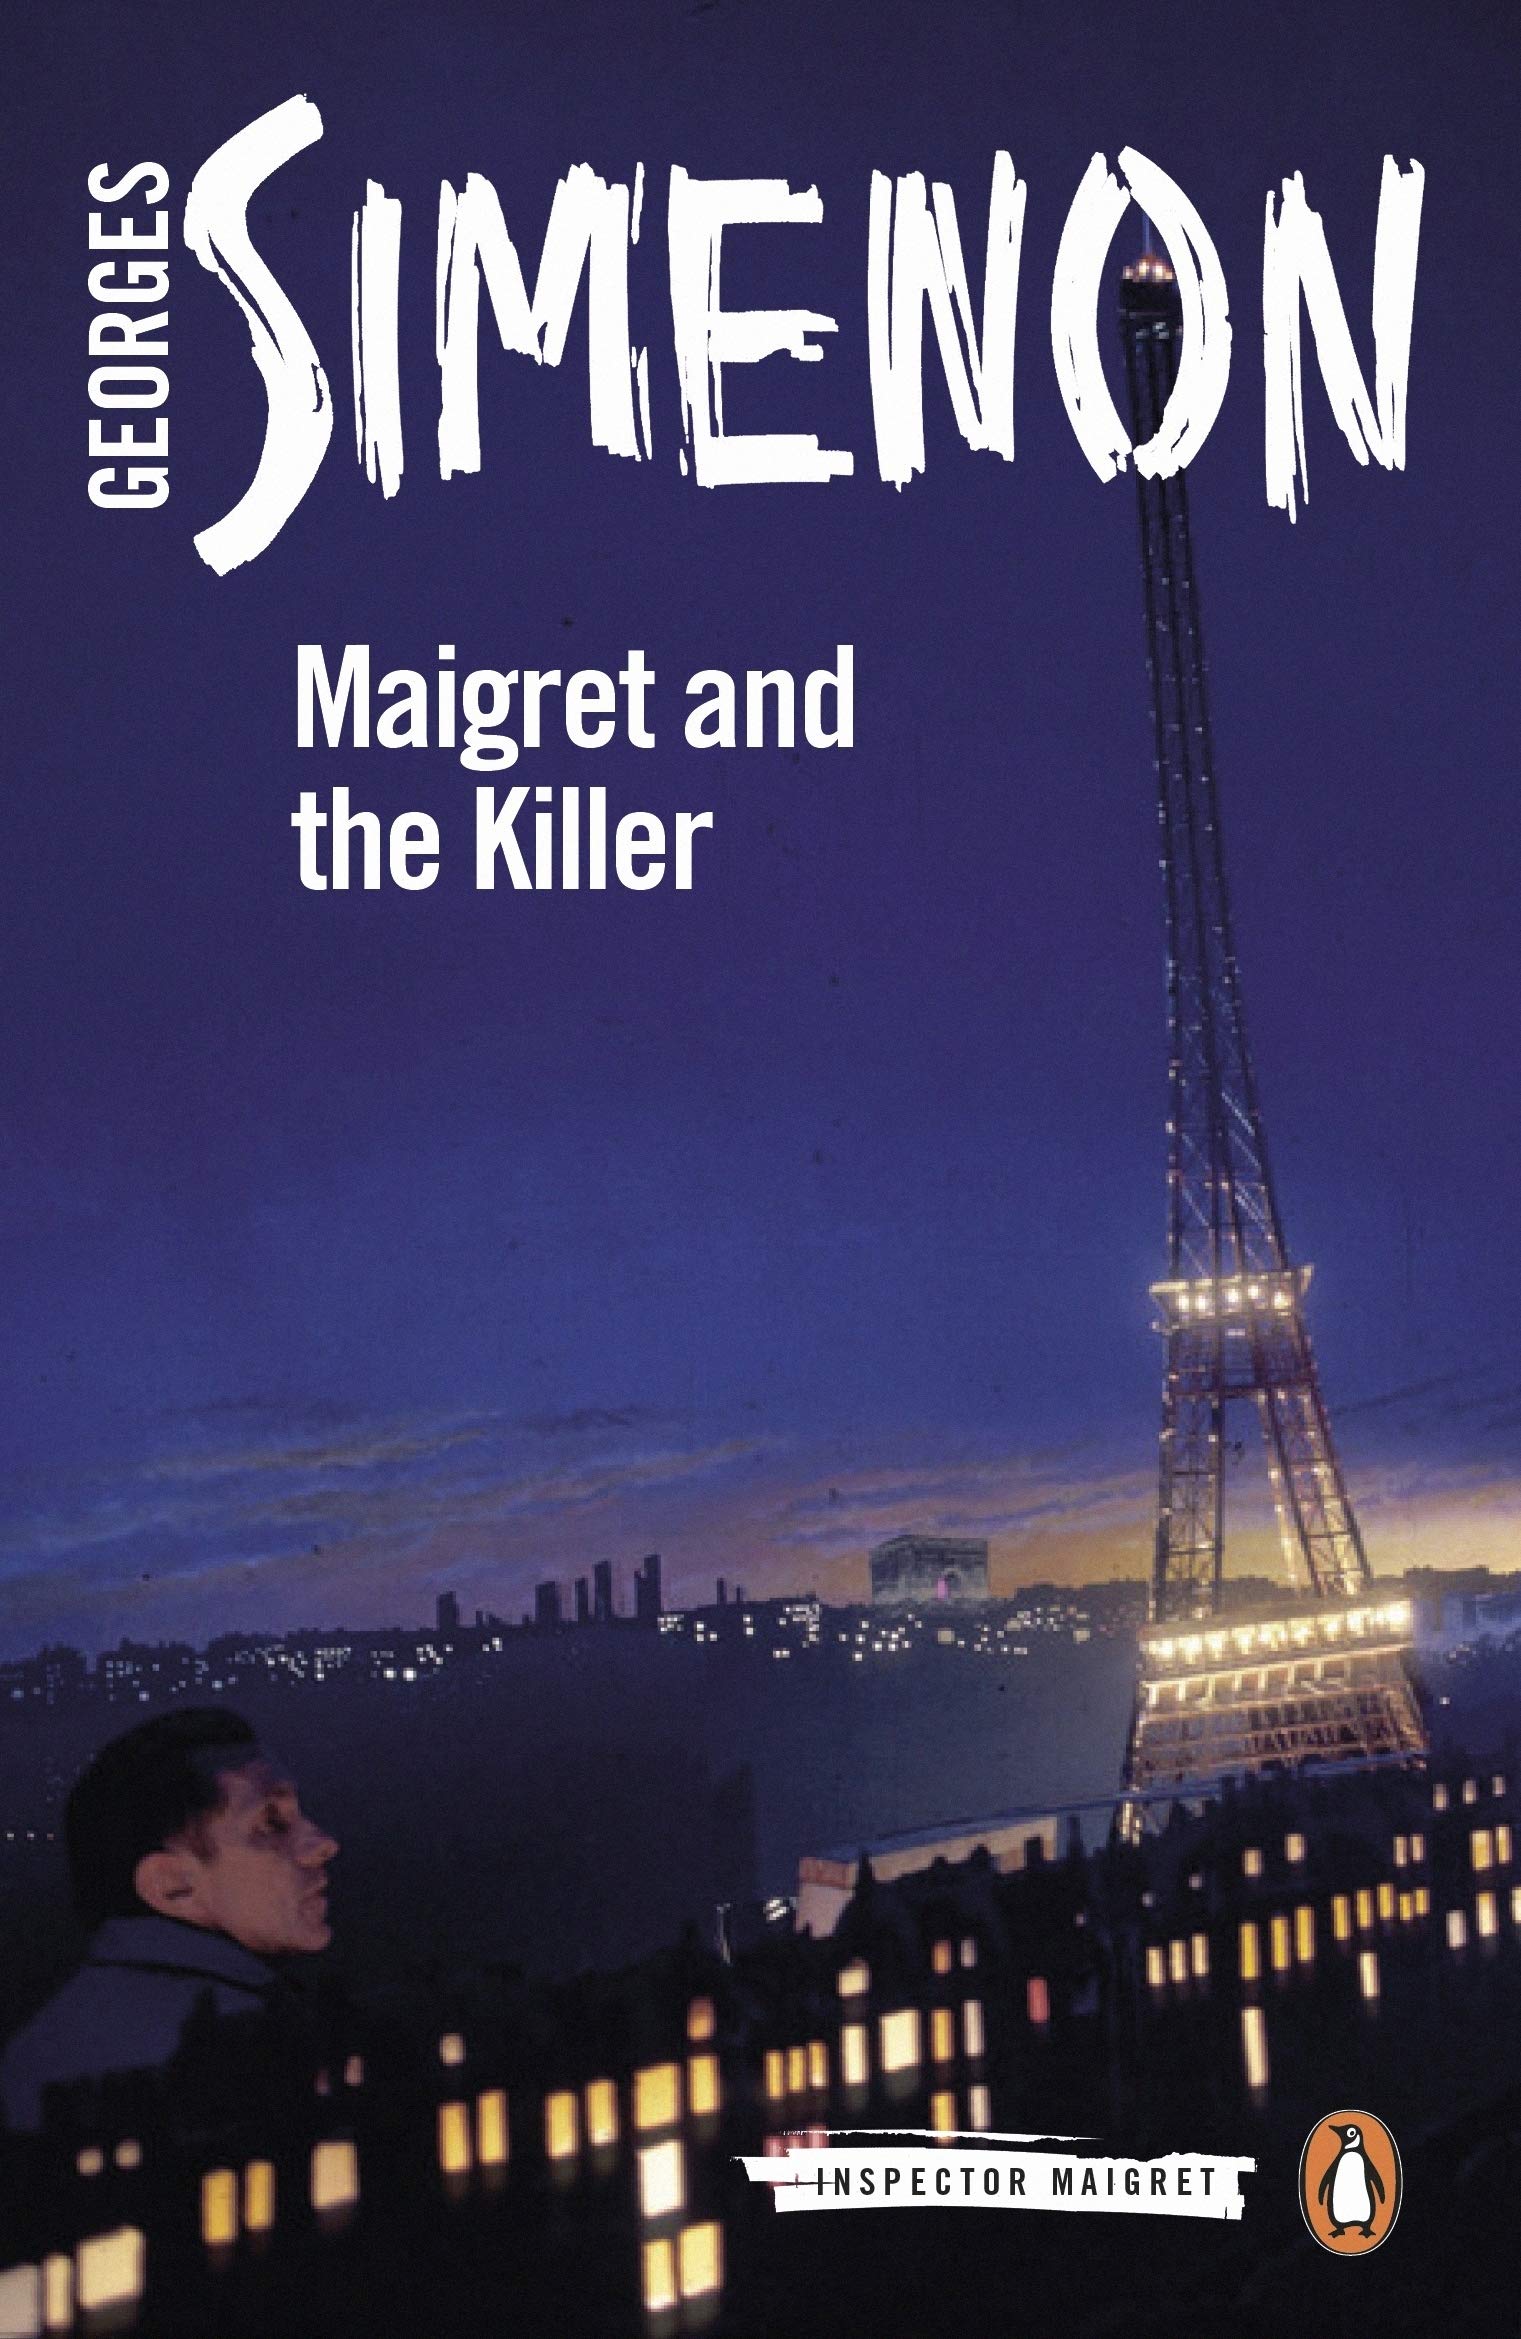 Maigret and the Killer